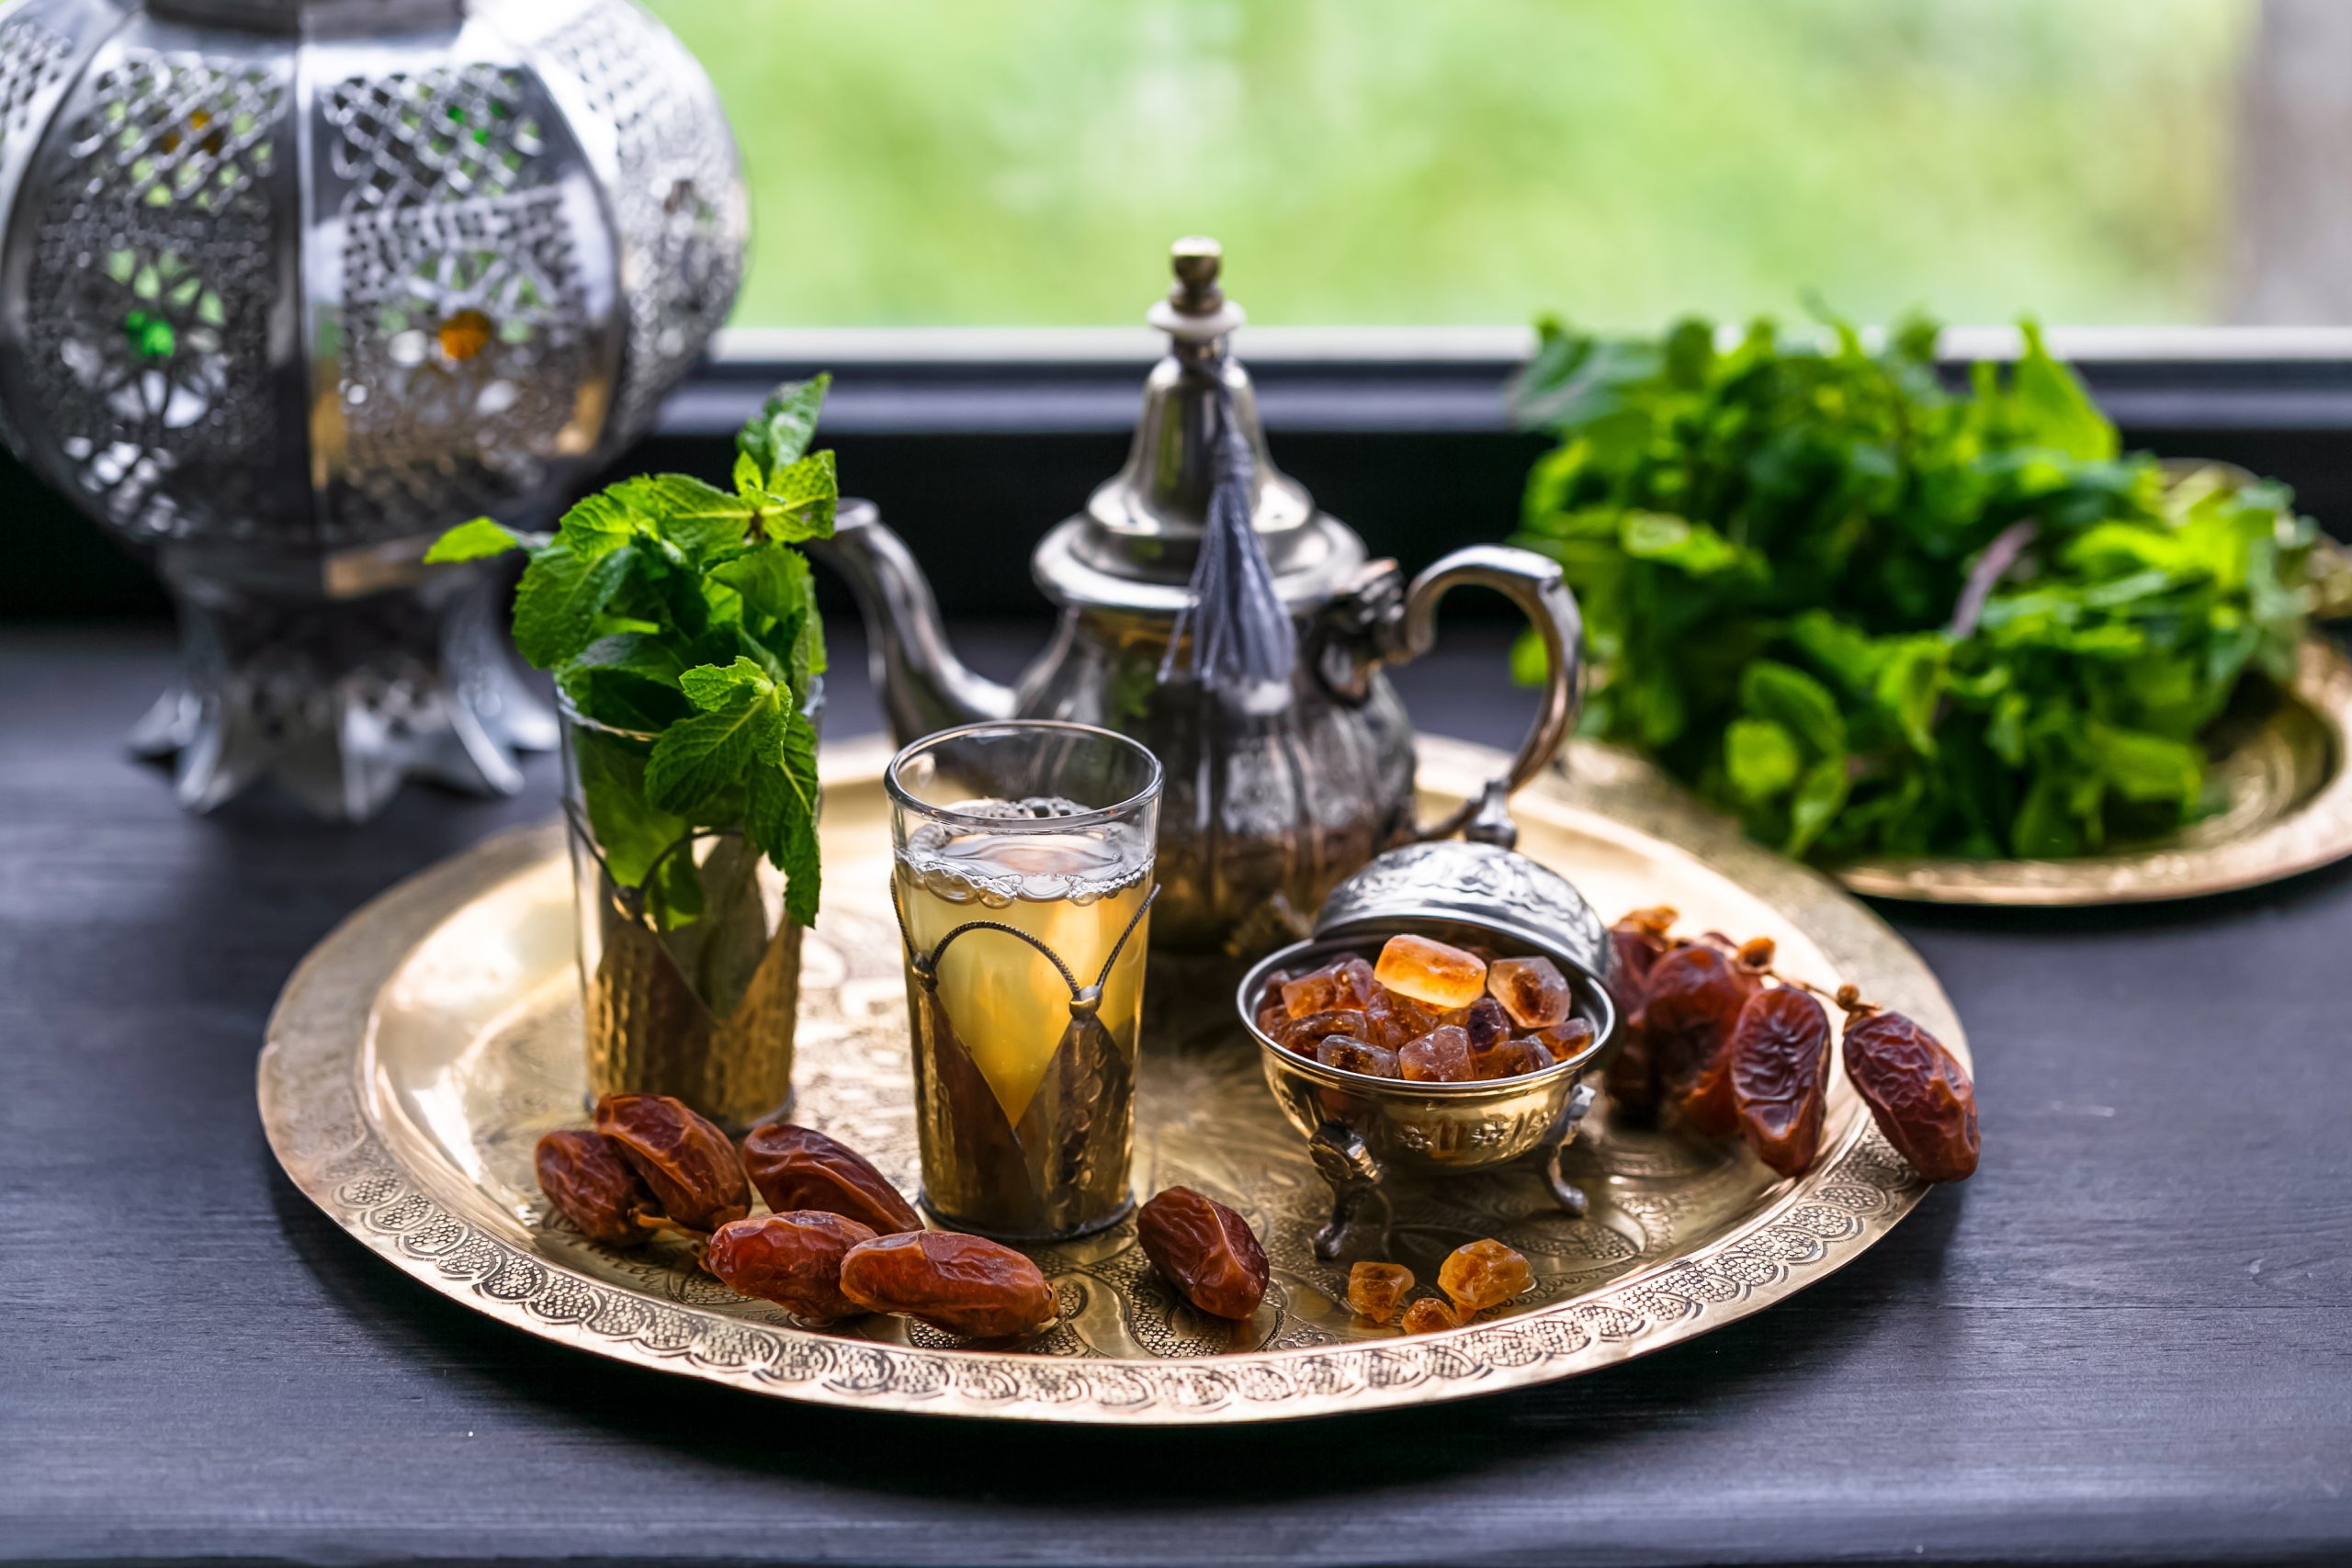 Moroccan,Tea,With,Mint,And,Sugar,In,A,Glasses,On